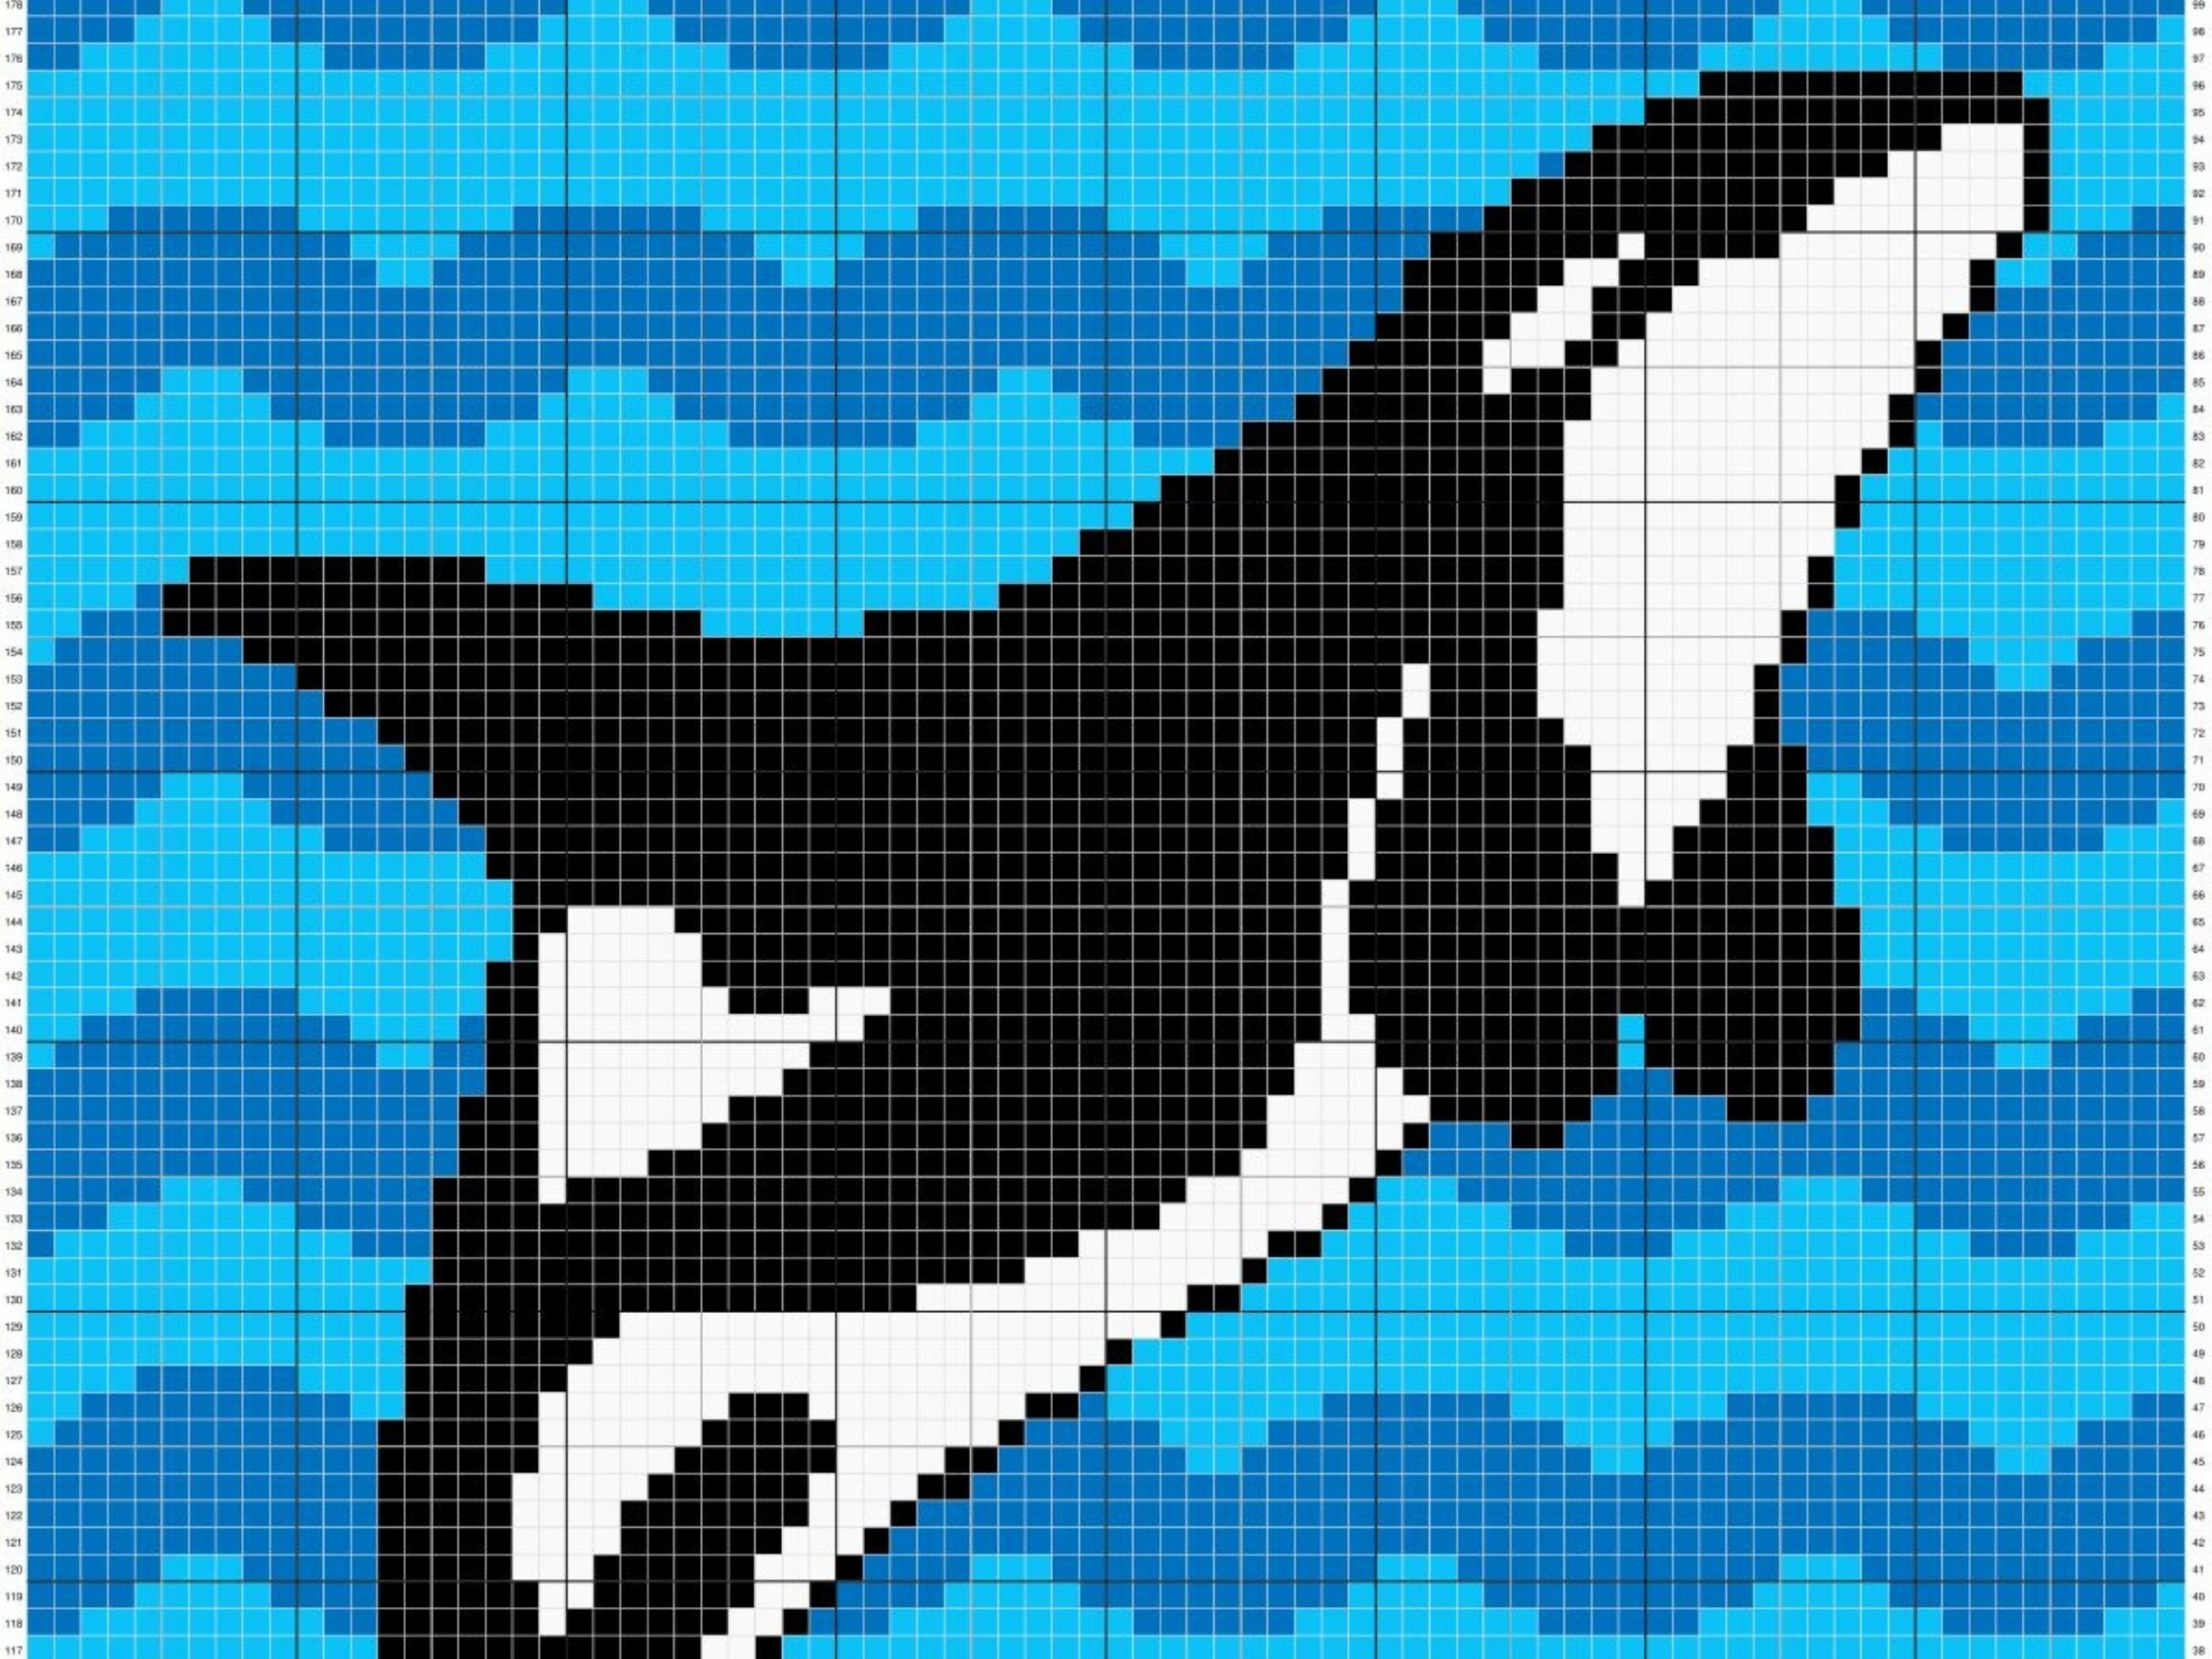 Ocean Orca Whale Graph Written Pattern For C2C & Tapestry | Etsy